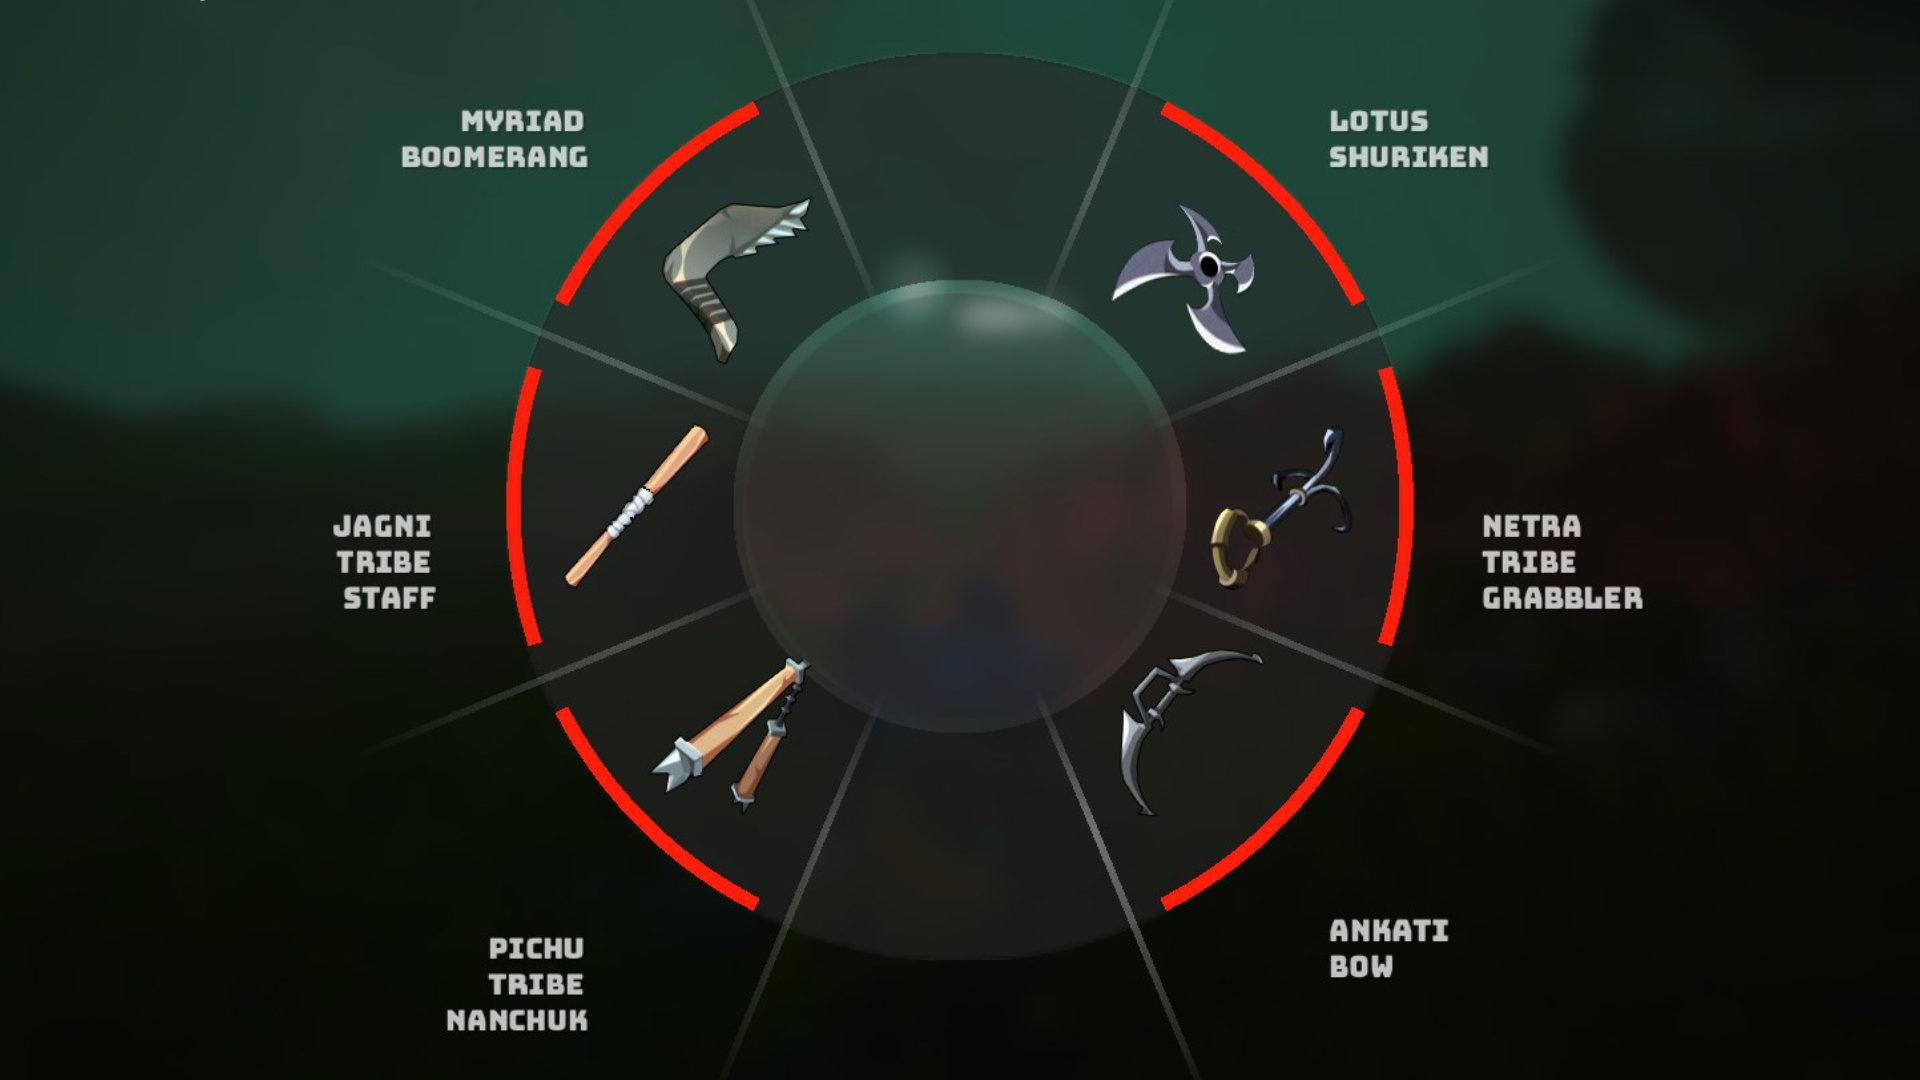 biomutant tribe weapons